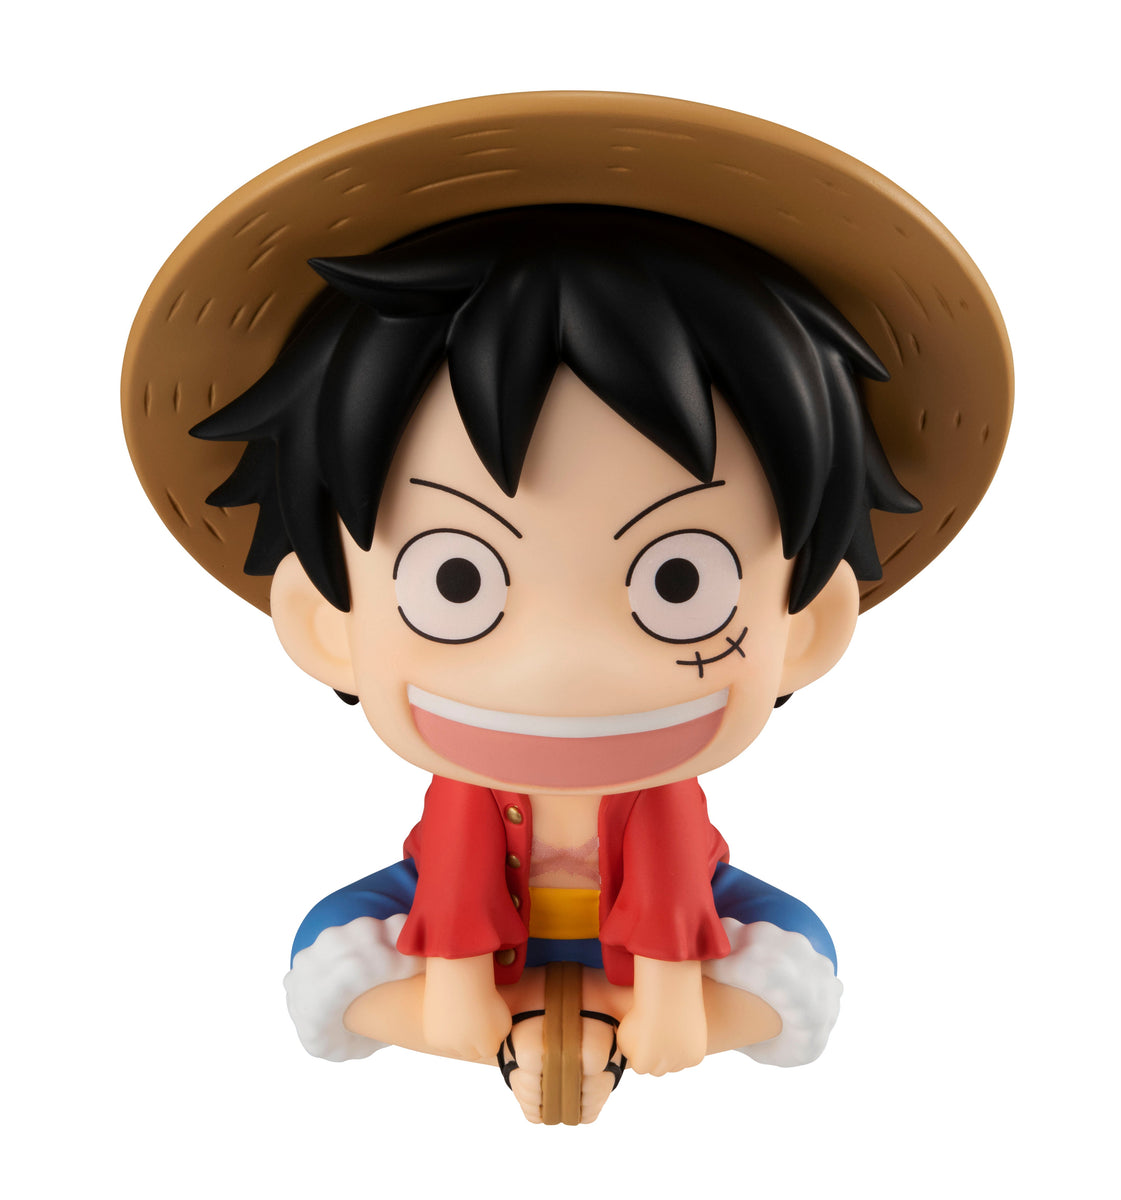 prompthunt: “monkey D luffy from one piece as a chimpanzee with